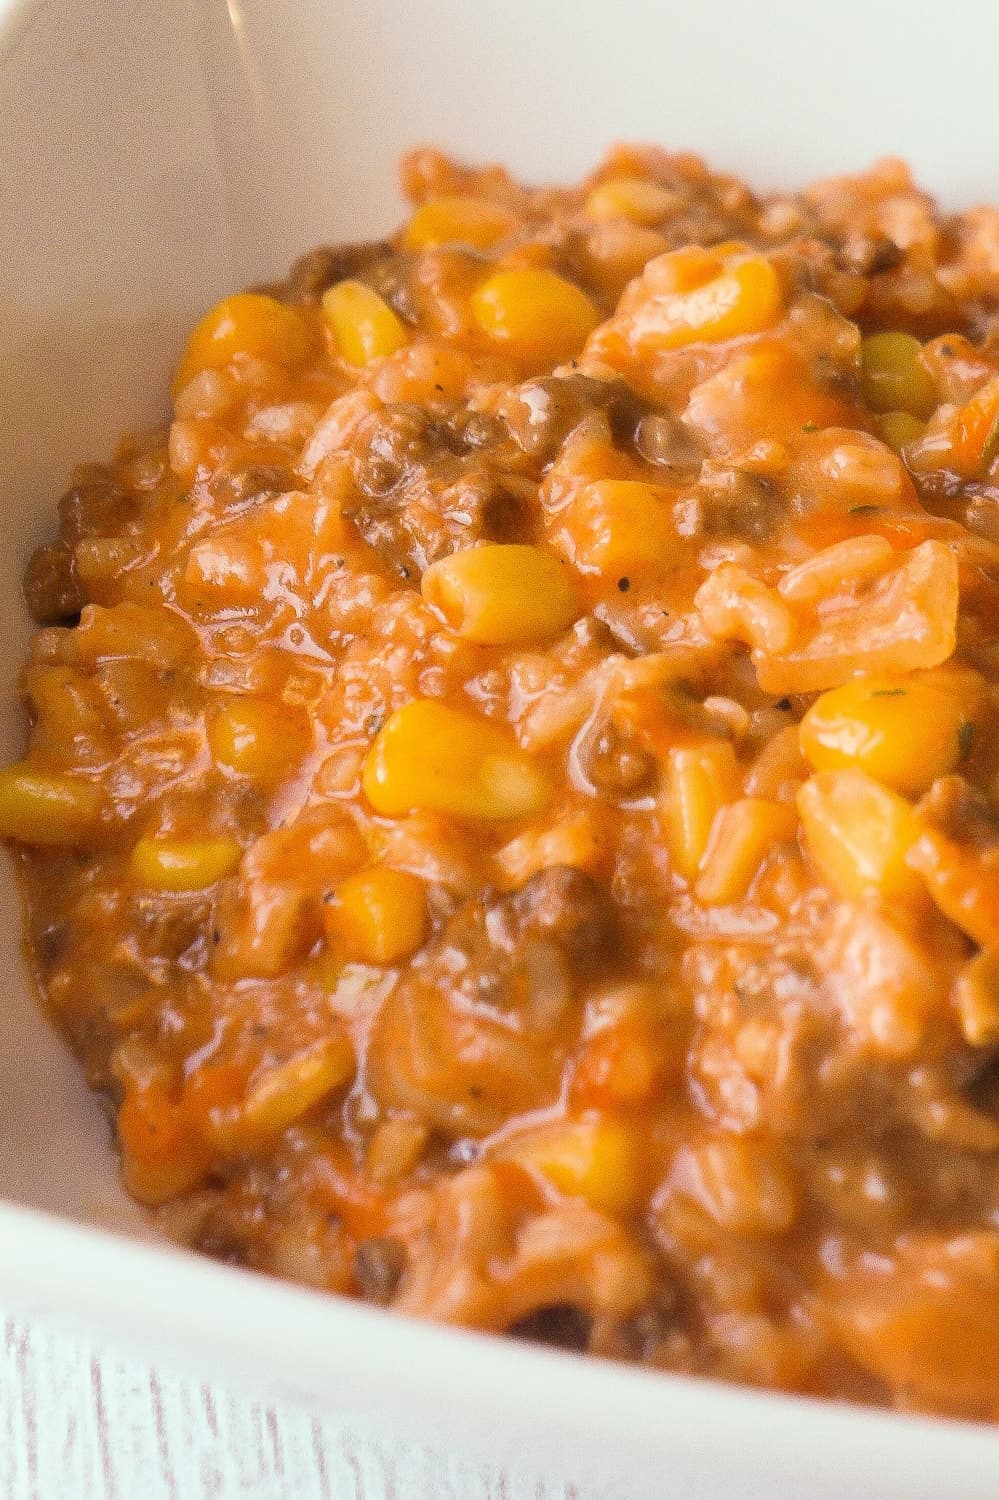 Cheesy Tomato Ground Beef and Rice is an easy stove top dinner recipe packed with flavour. This ground beef dish is made with cream of tomato soup, canned corn, instant rice and loaded with cheddar cheese.